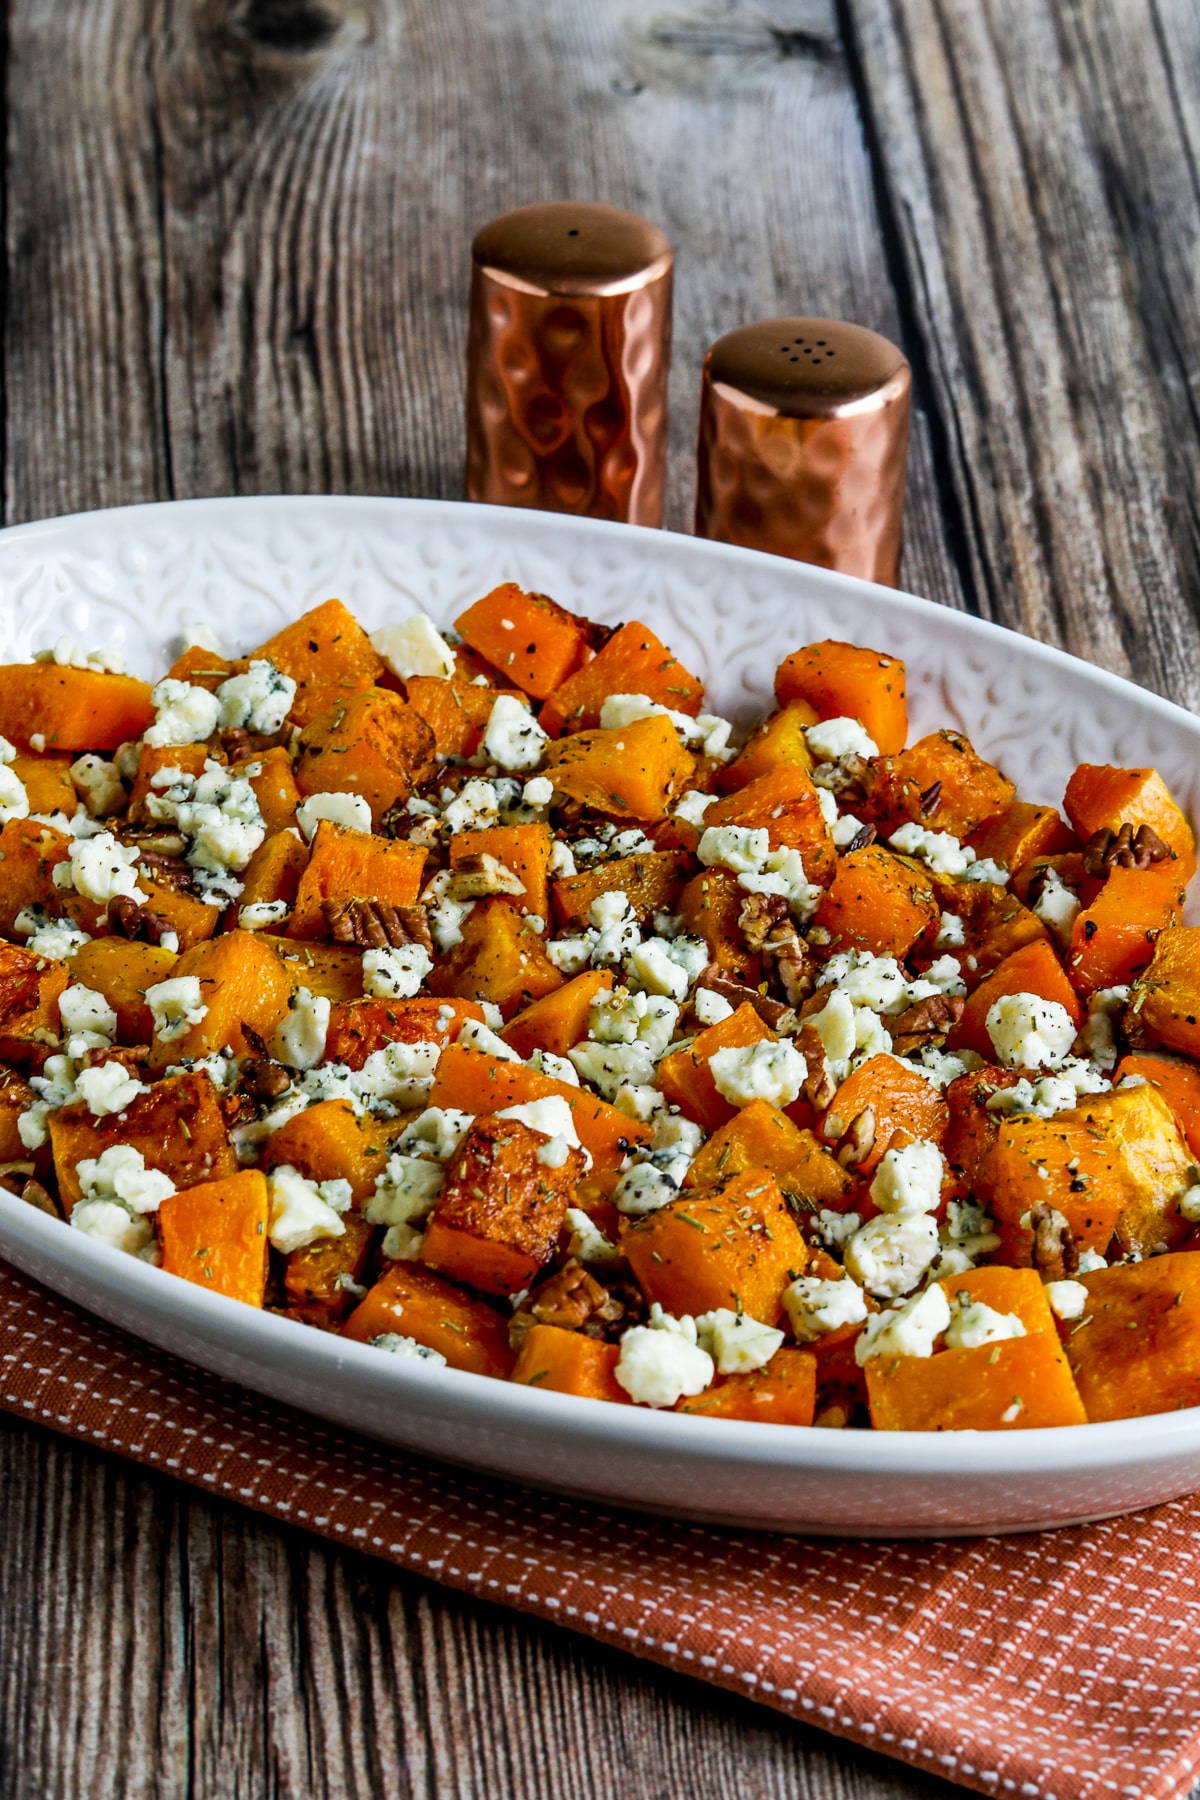 Roasted butternut squash with rosemary, pecans and gorgonzola